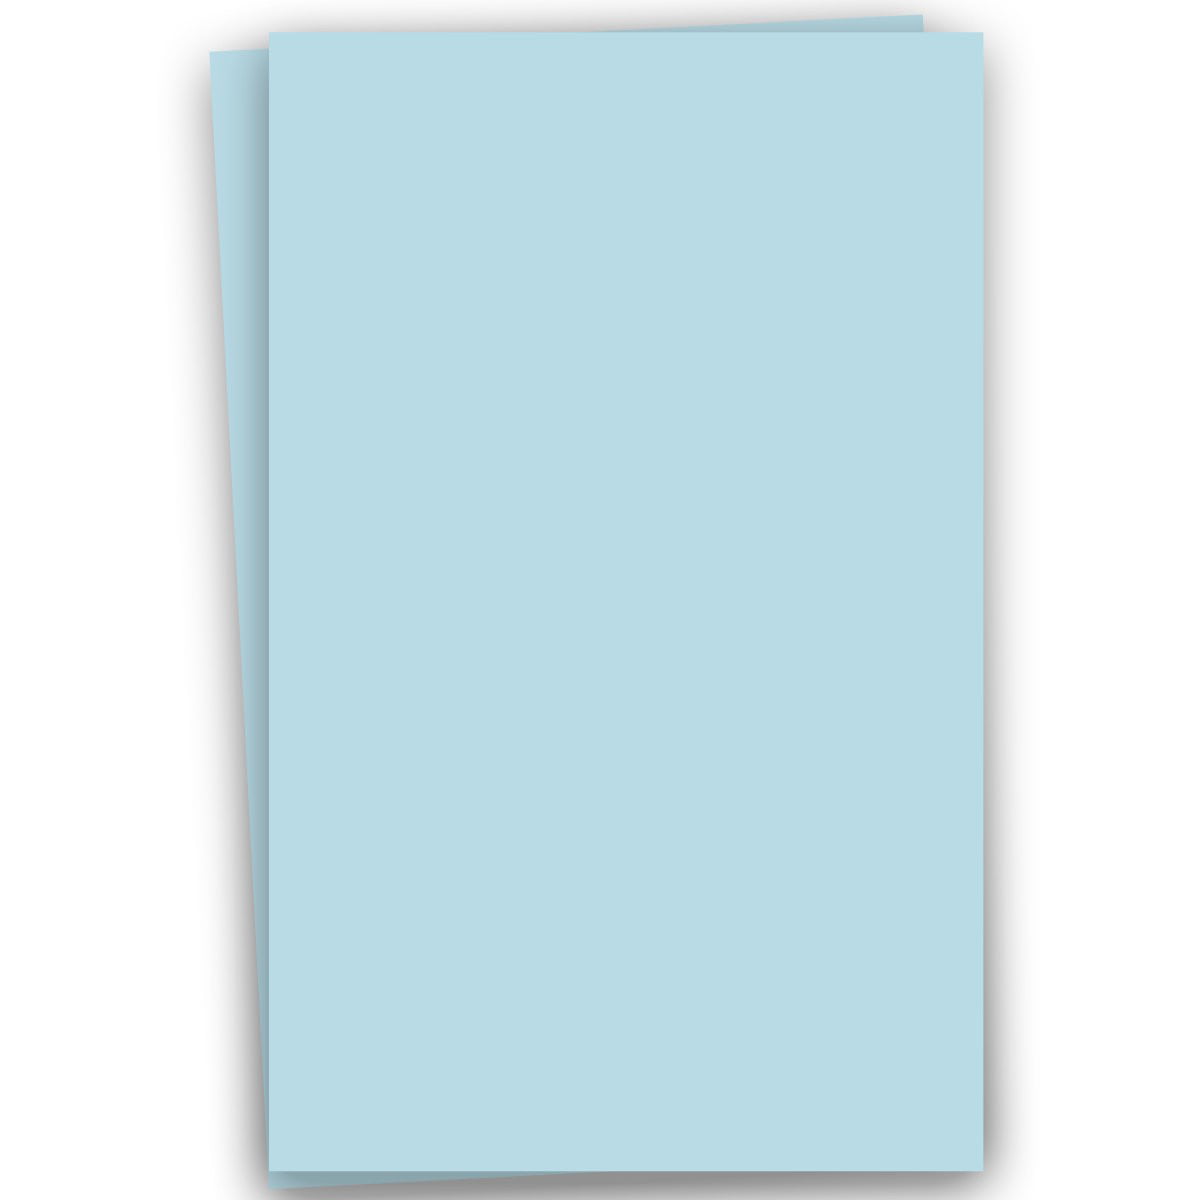 Popular BERRYLICIOUS BLUE 12X18 Paper 65C Lightweight Cardstock - 250 PK --  Econo 12-x-18 Large size Card Stock Paper - Business, Card Making,  Designers, Professional and DIY Projects 